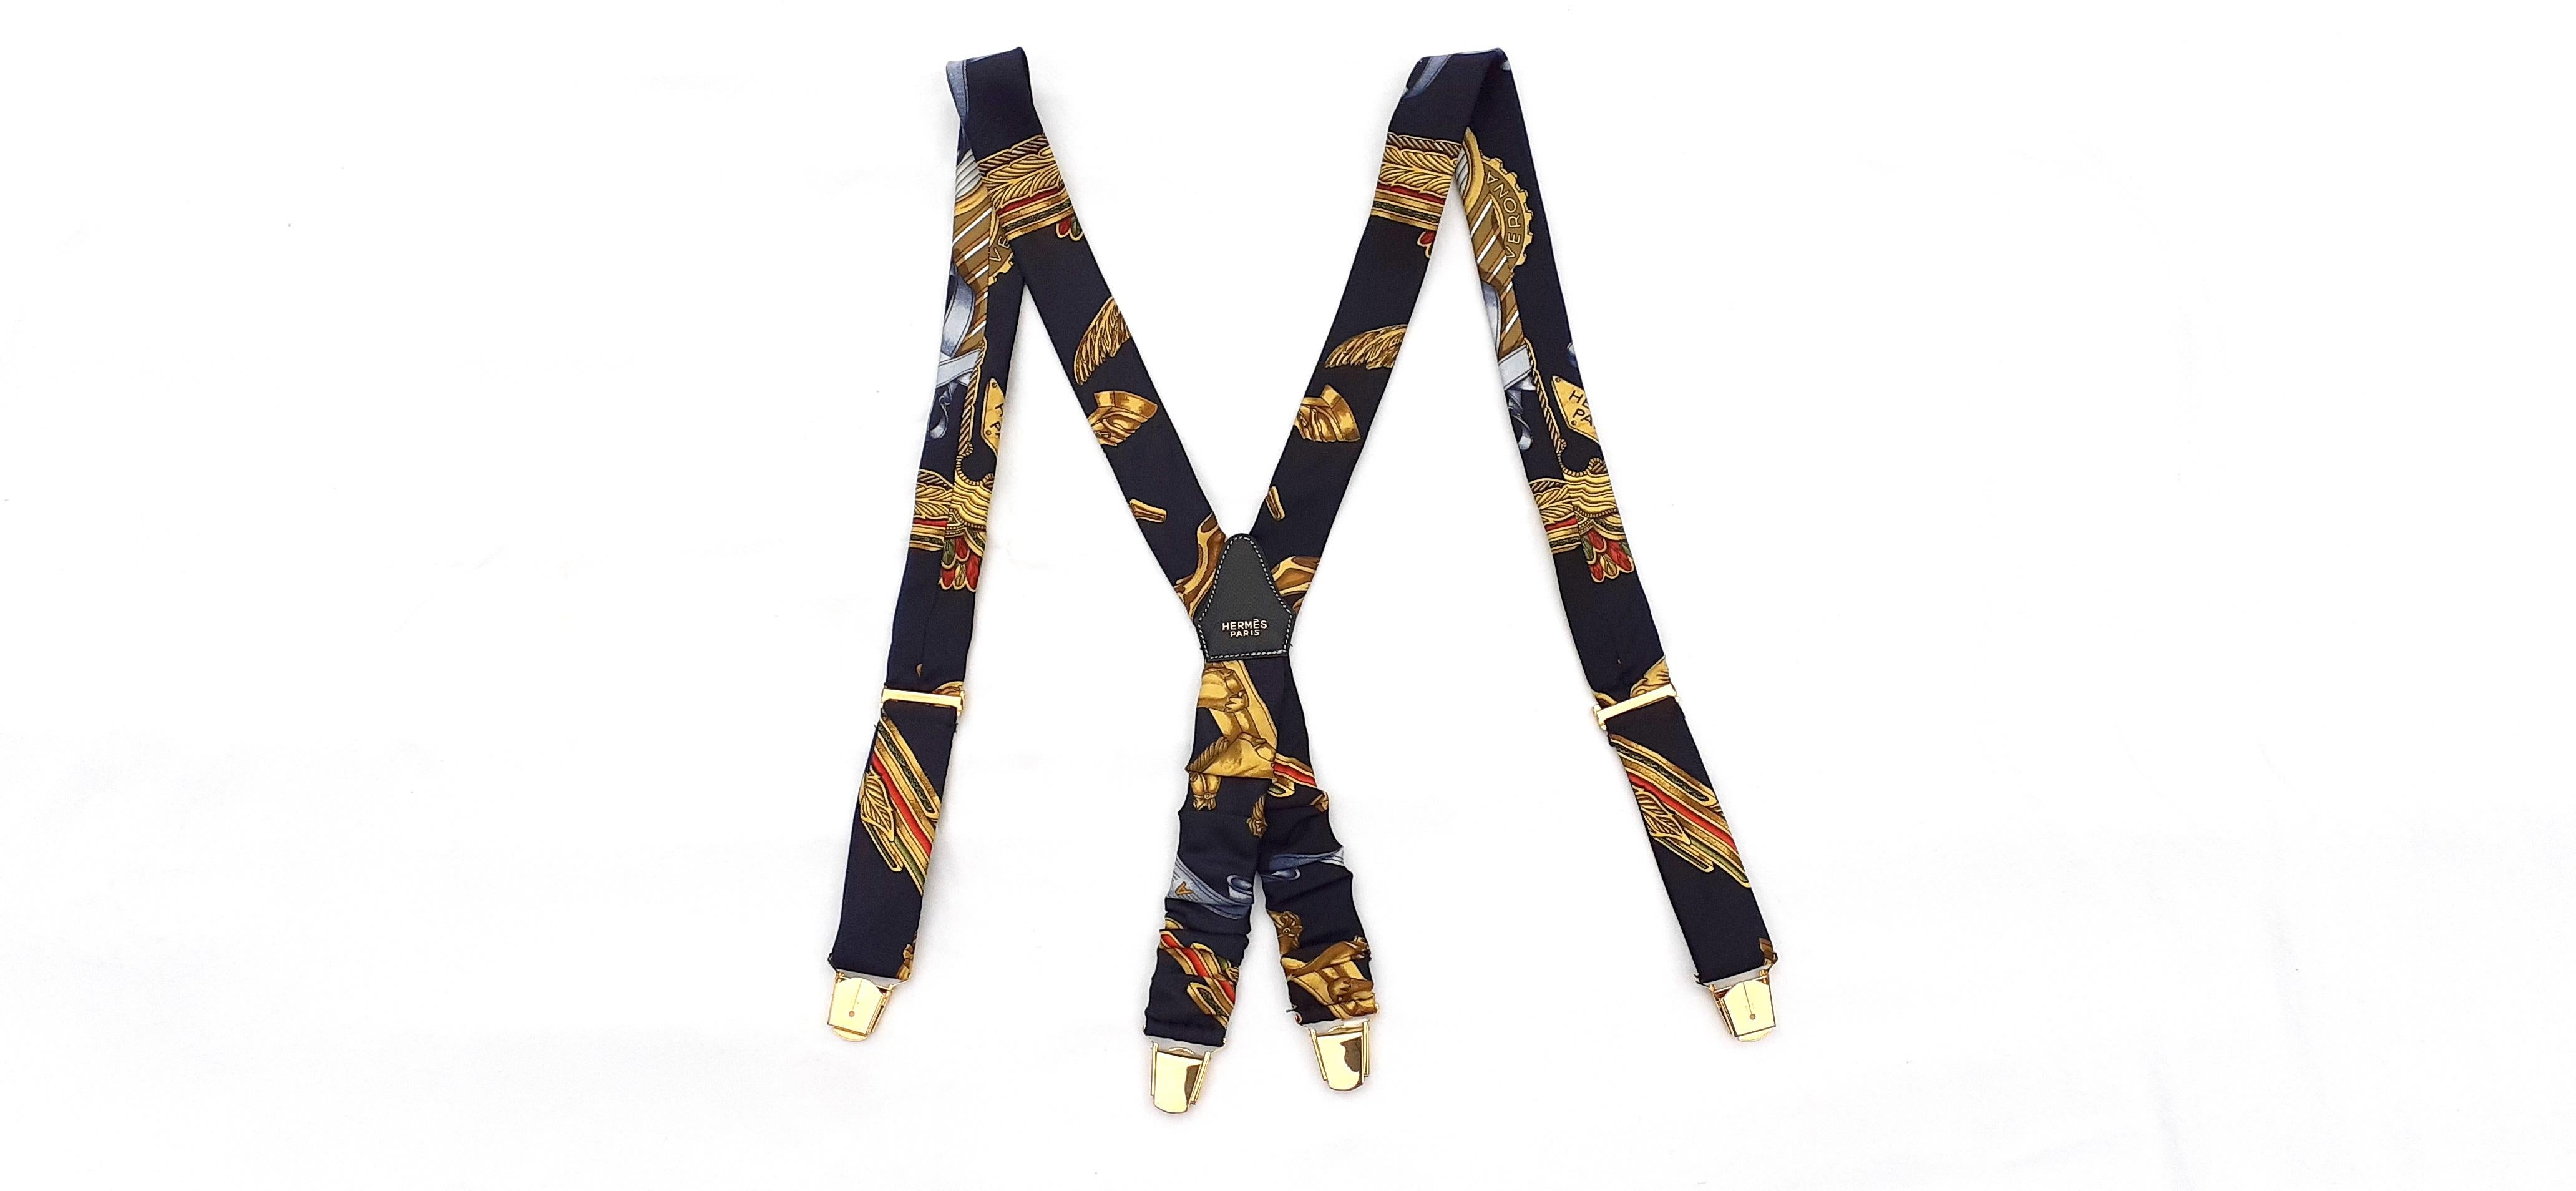 Stunning Authentic Hermès Suspenders

Made in France

Made of Silk and Leather

Colorways: Black Blue Red Golden

